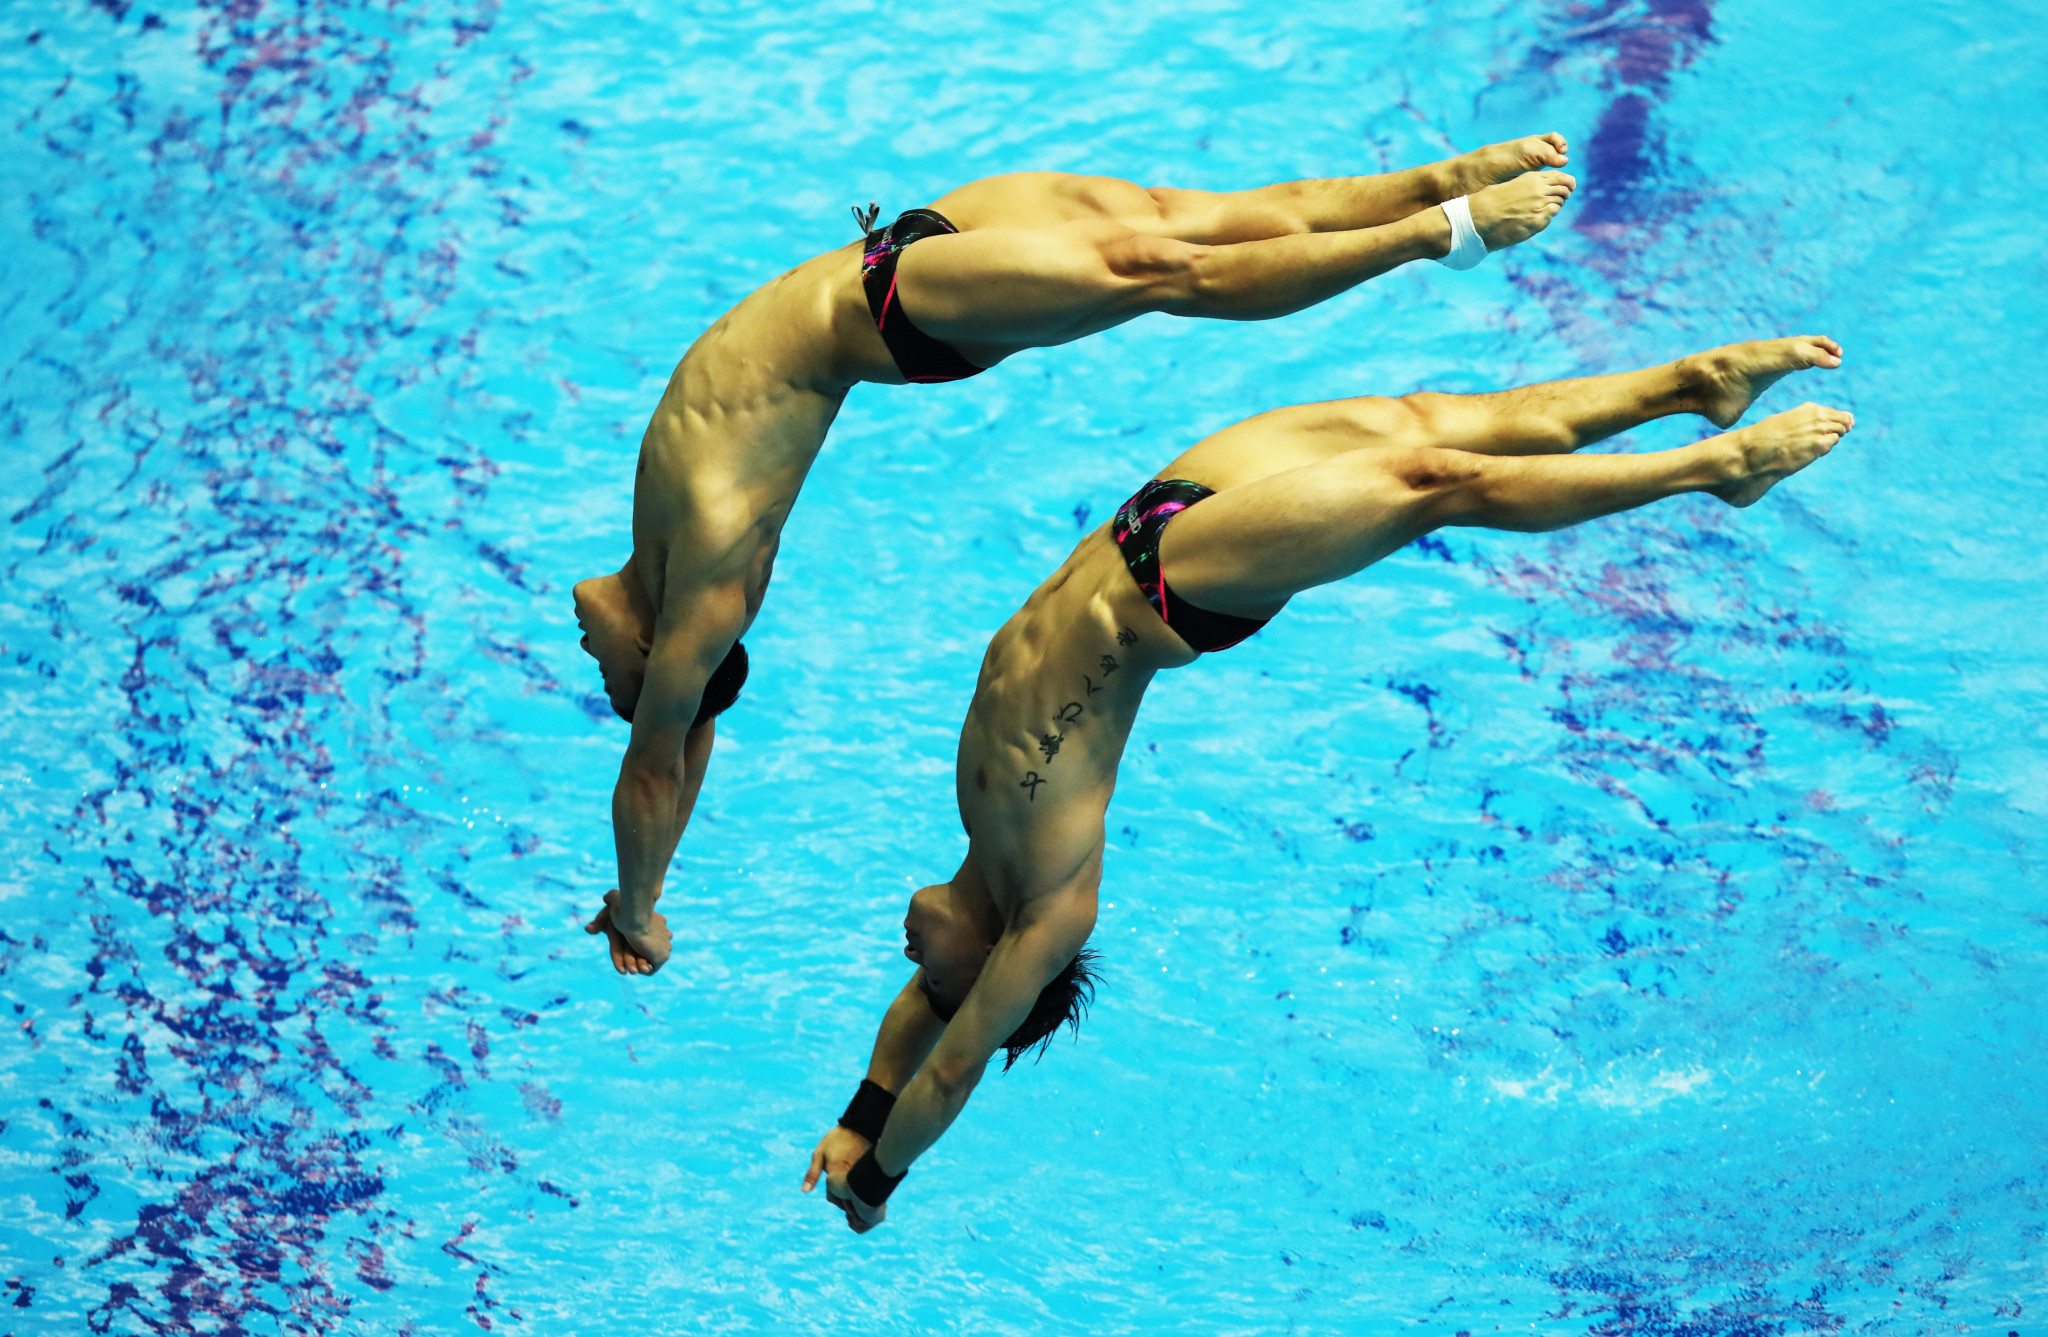 Chew Yiwei and Ooi Tze Liang won the men's synchronised springboard event ©Getty Images